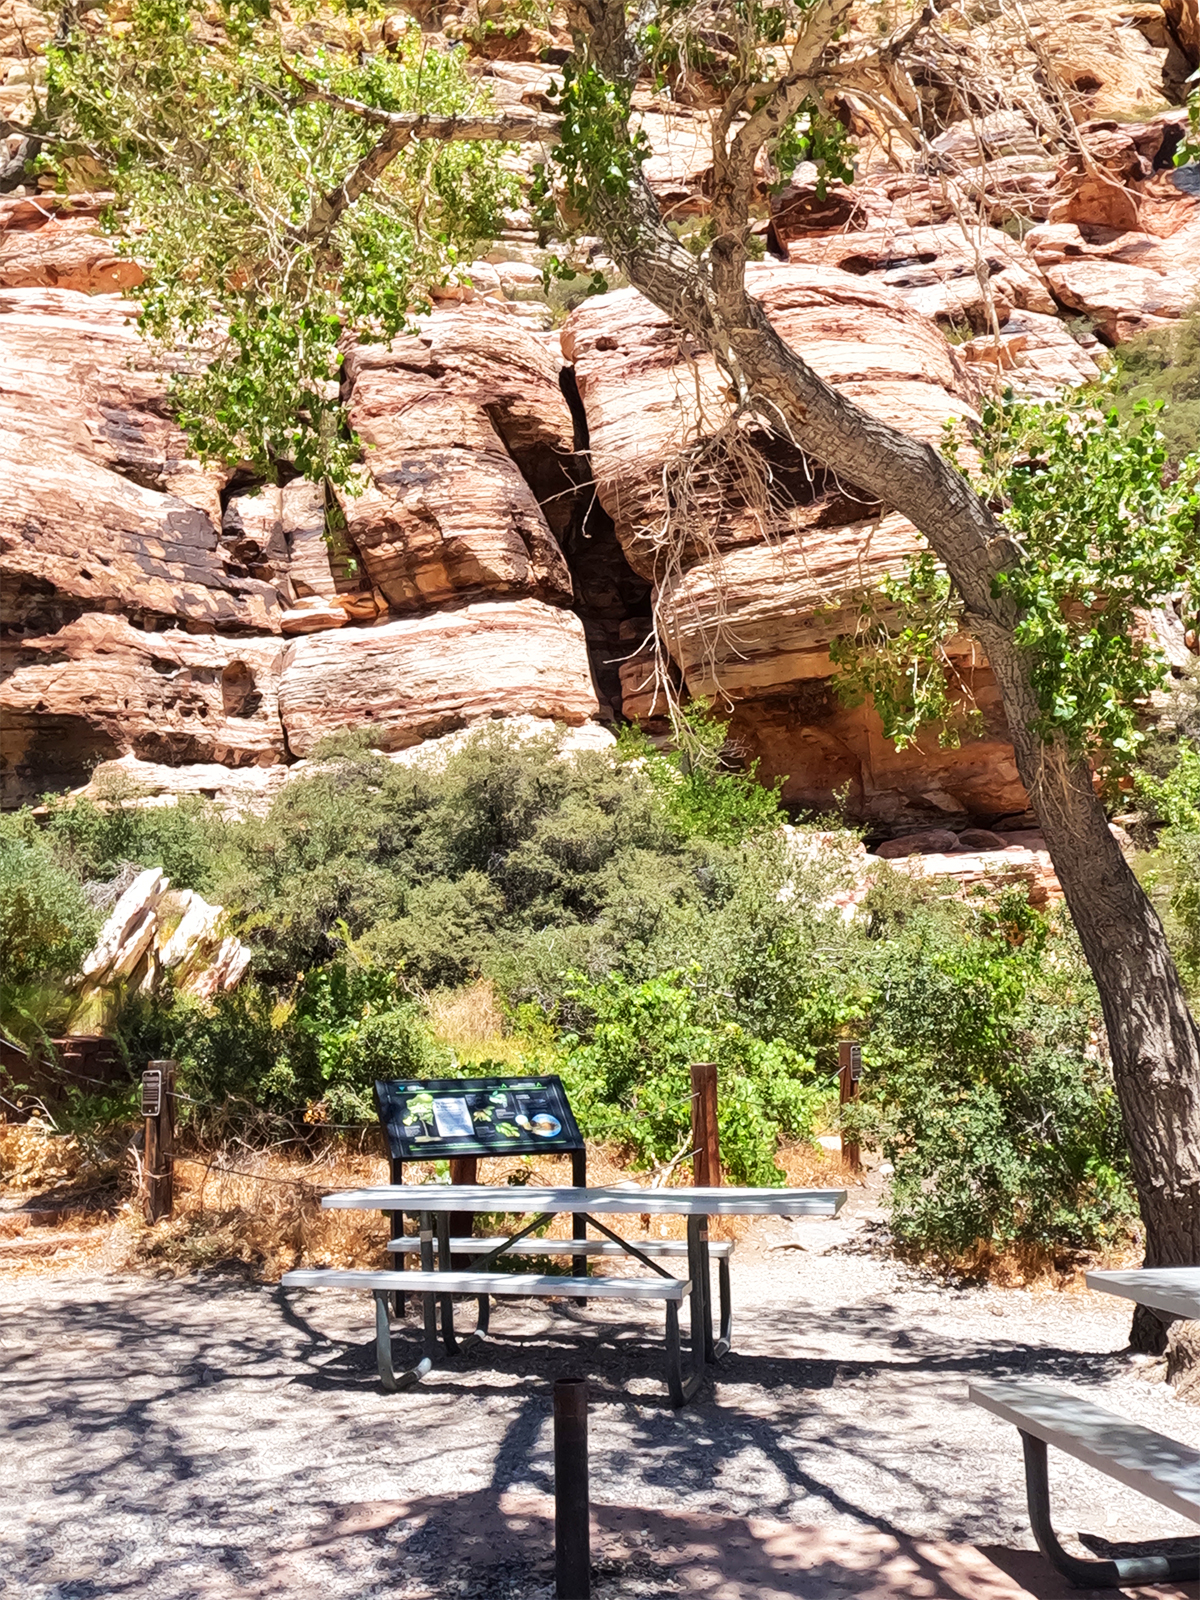 picnic table under tree with desert surrounding it